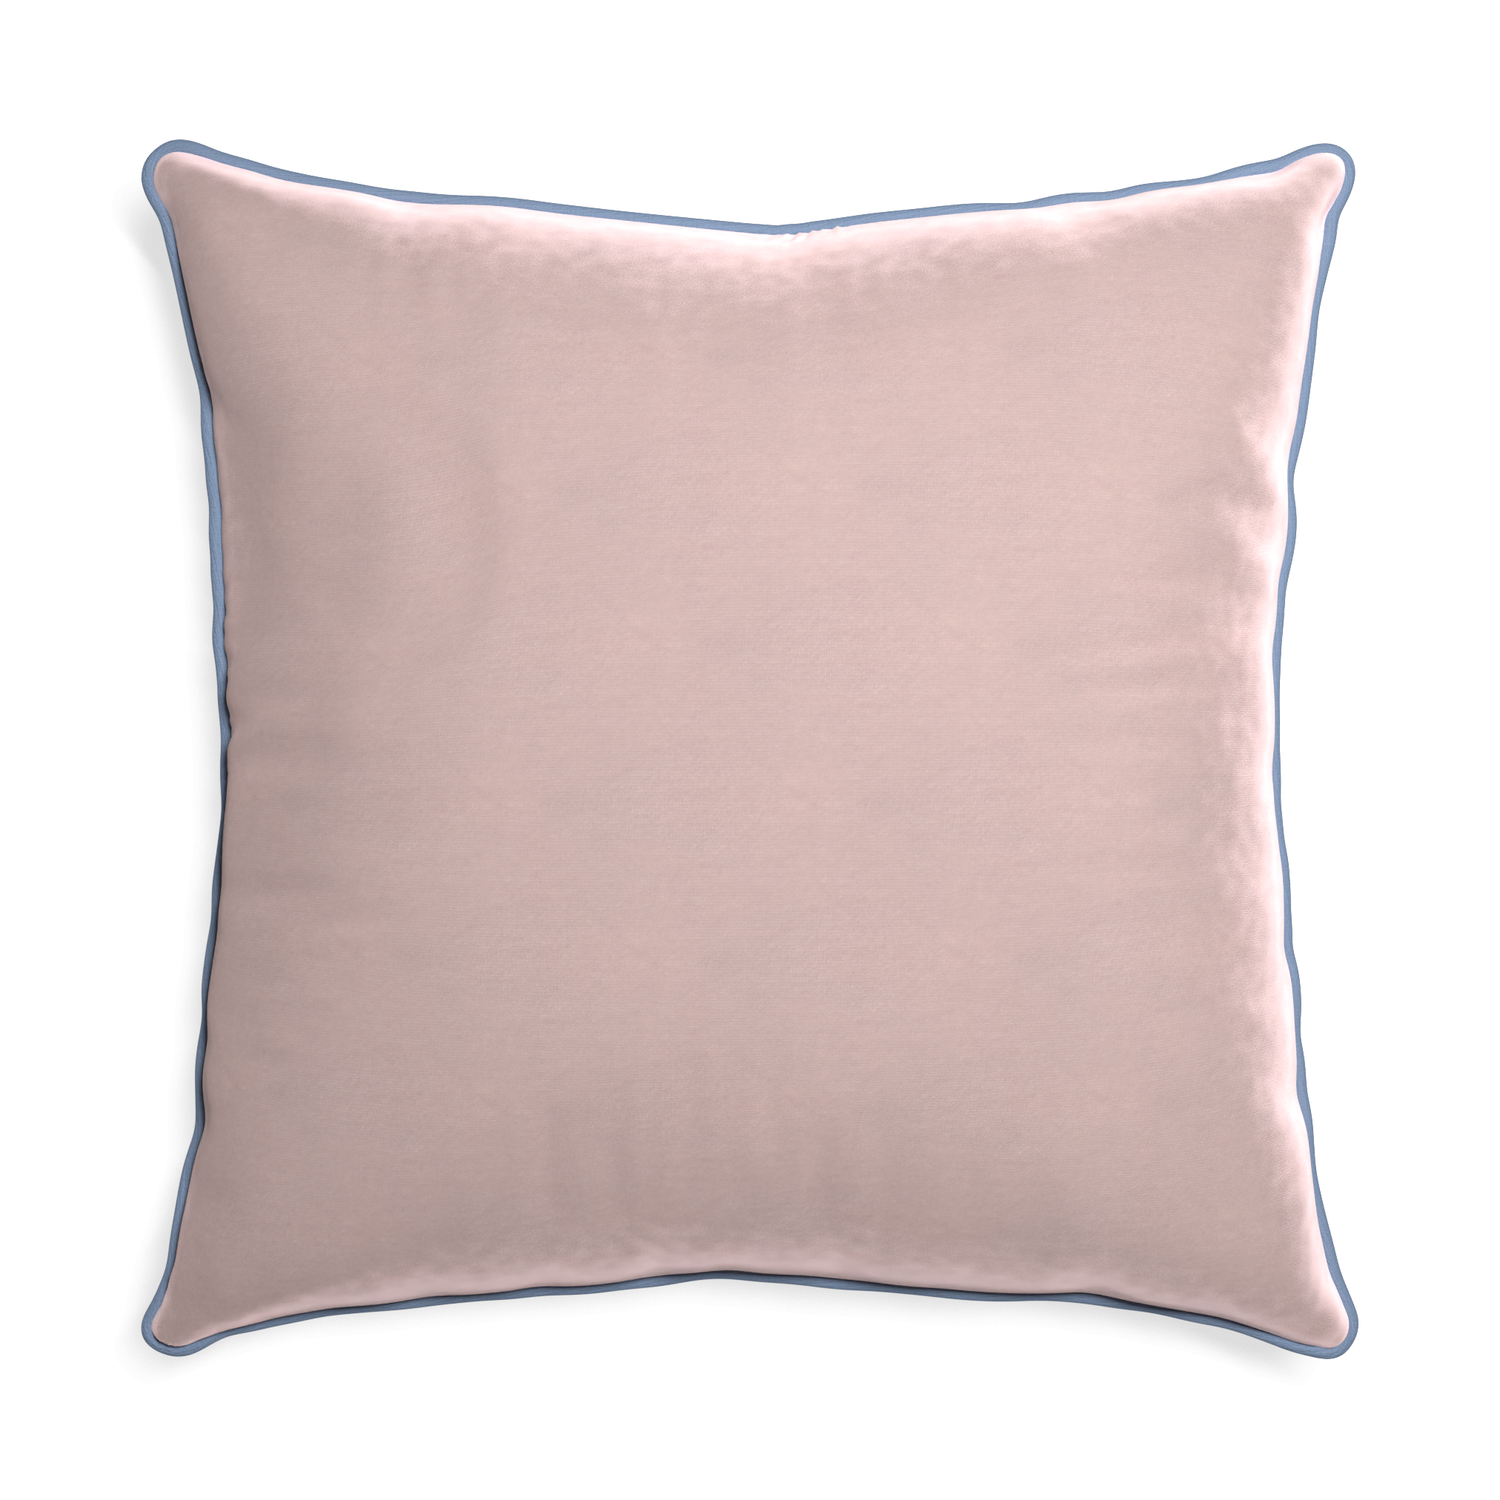 square light pink velvet pillow with sky blue piping